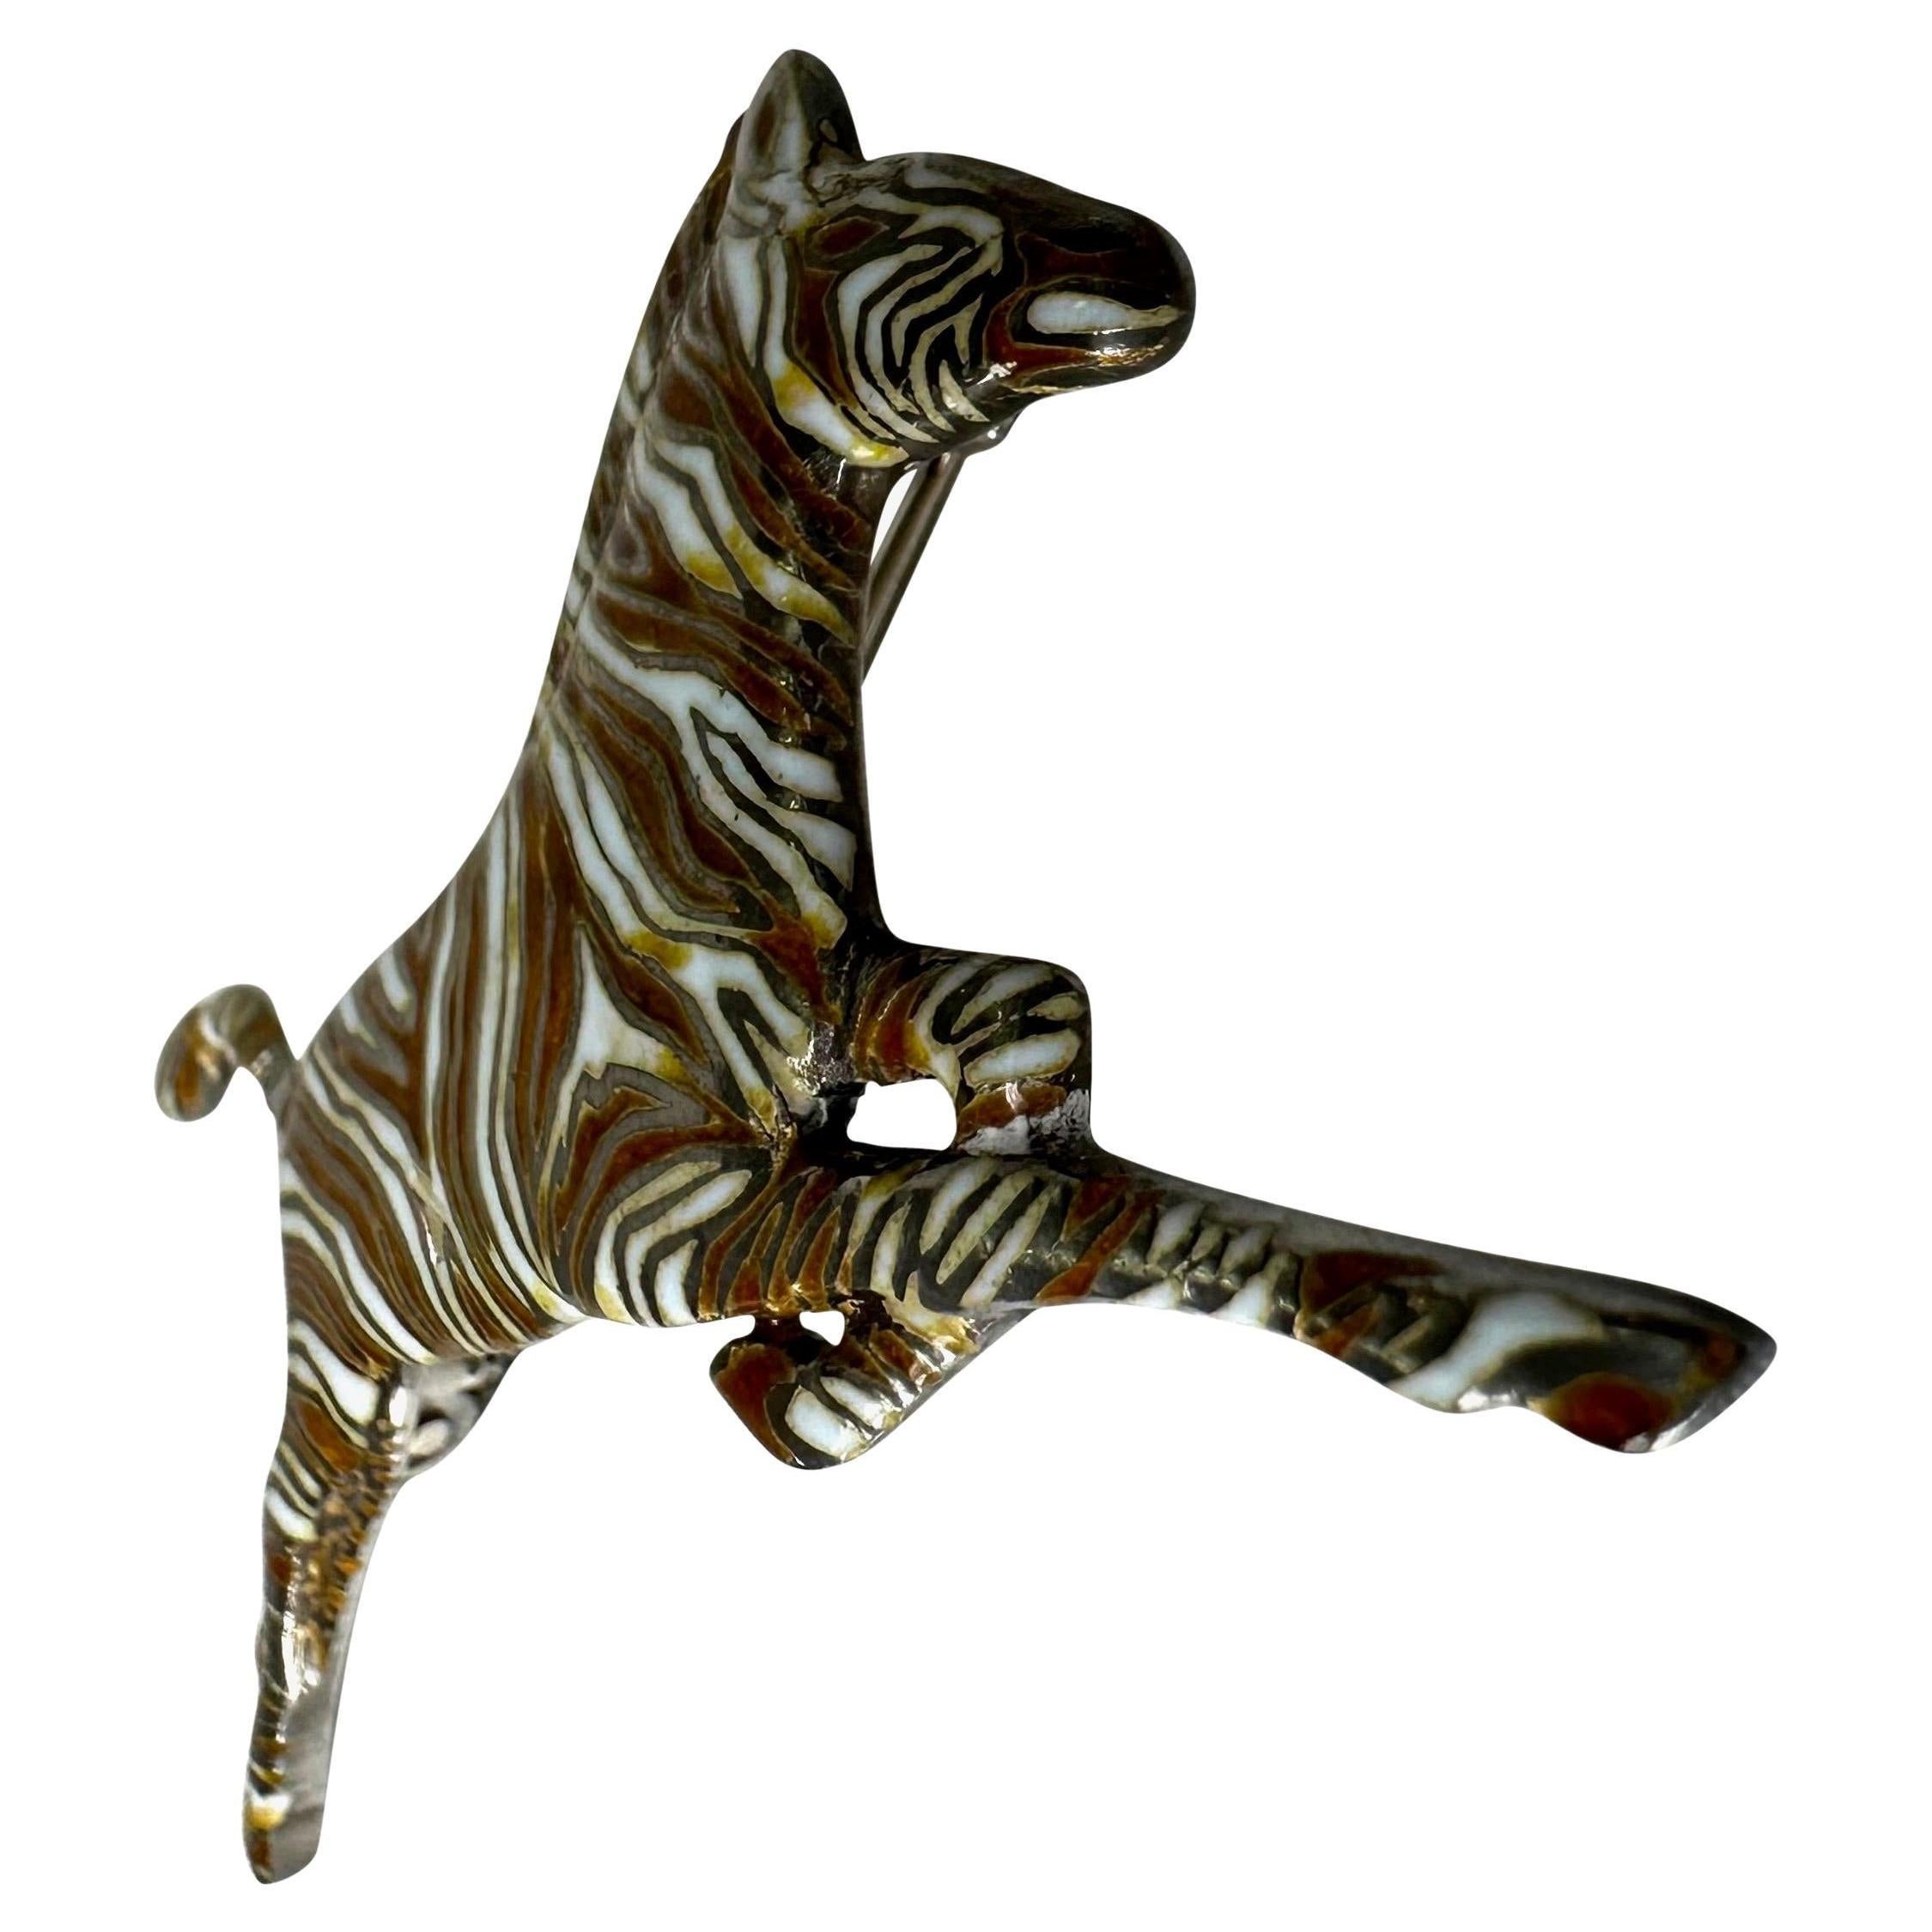 Presenting a sterling silver enamel-covered Gucci Zebra brooch. From the 1970s, this zebra was used in many Gucci pieces and patterns. A rare piece from the early days of Gucci, this brooch is the perfect addition to any Gucci lover's